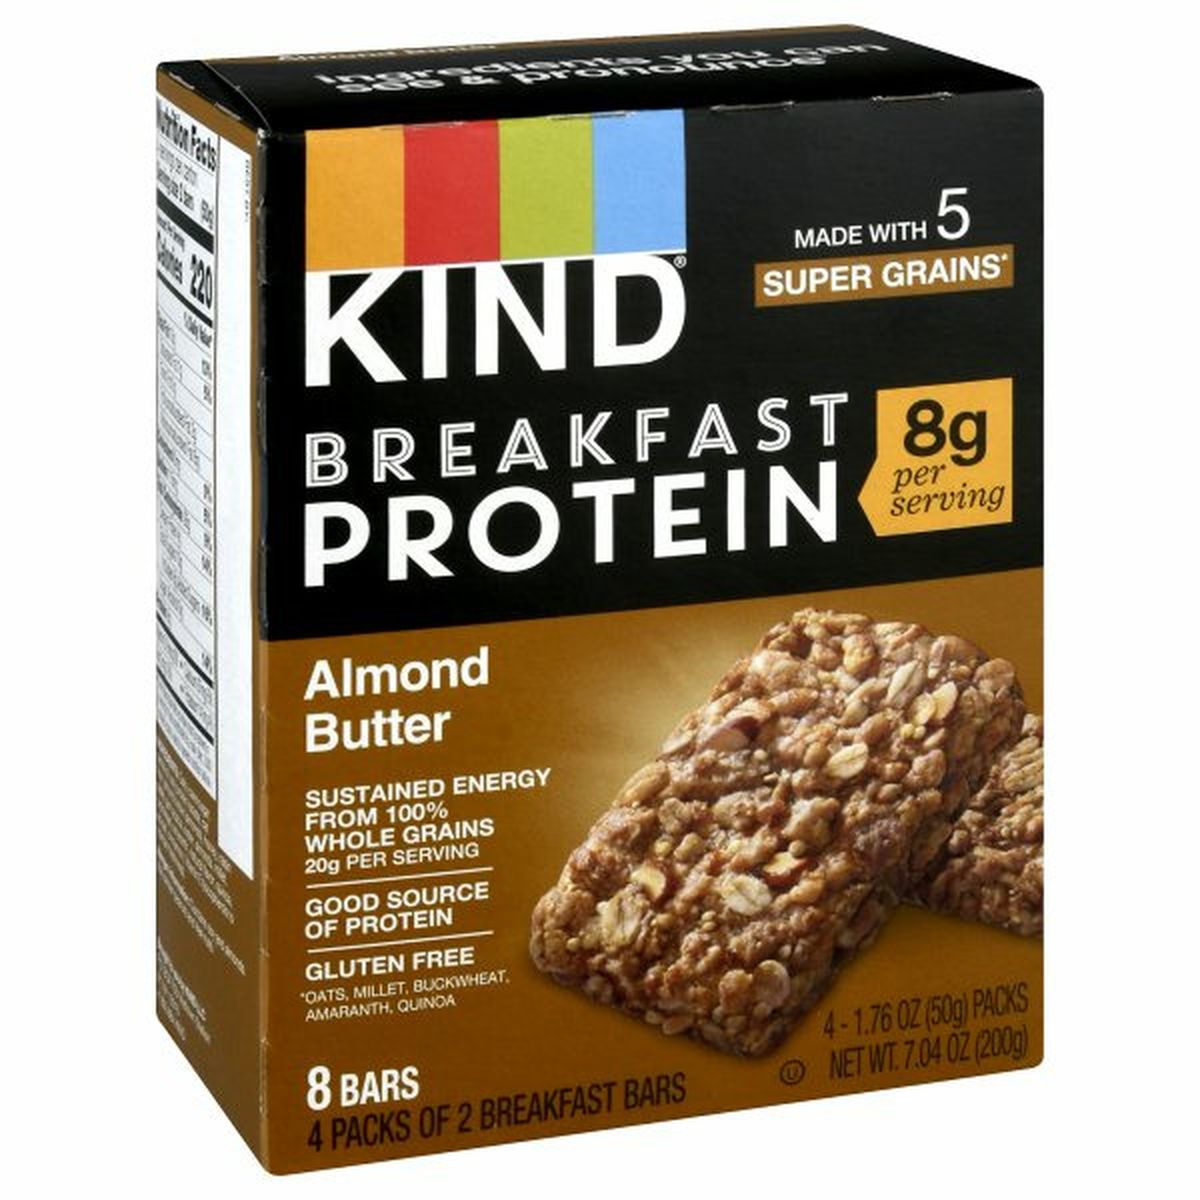 Calories in KIND Breakfast Protein Bars, Almond Butter